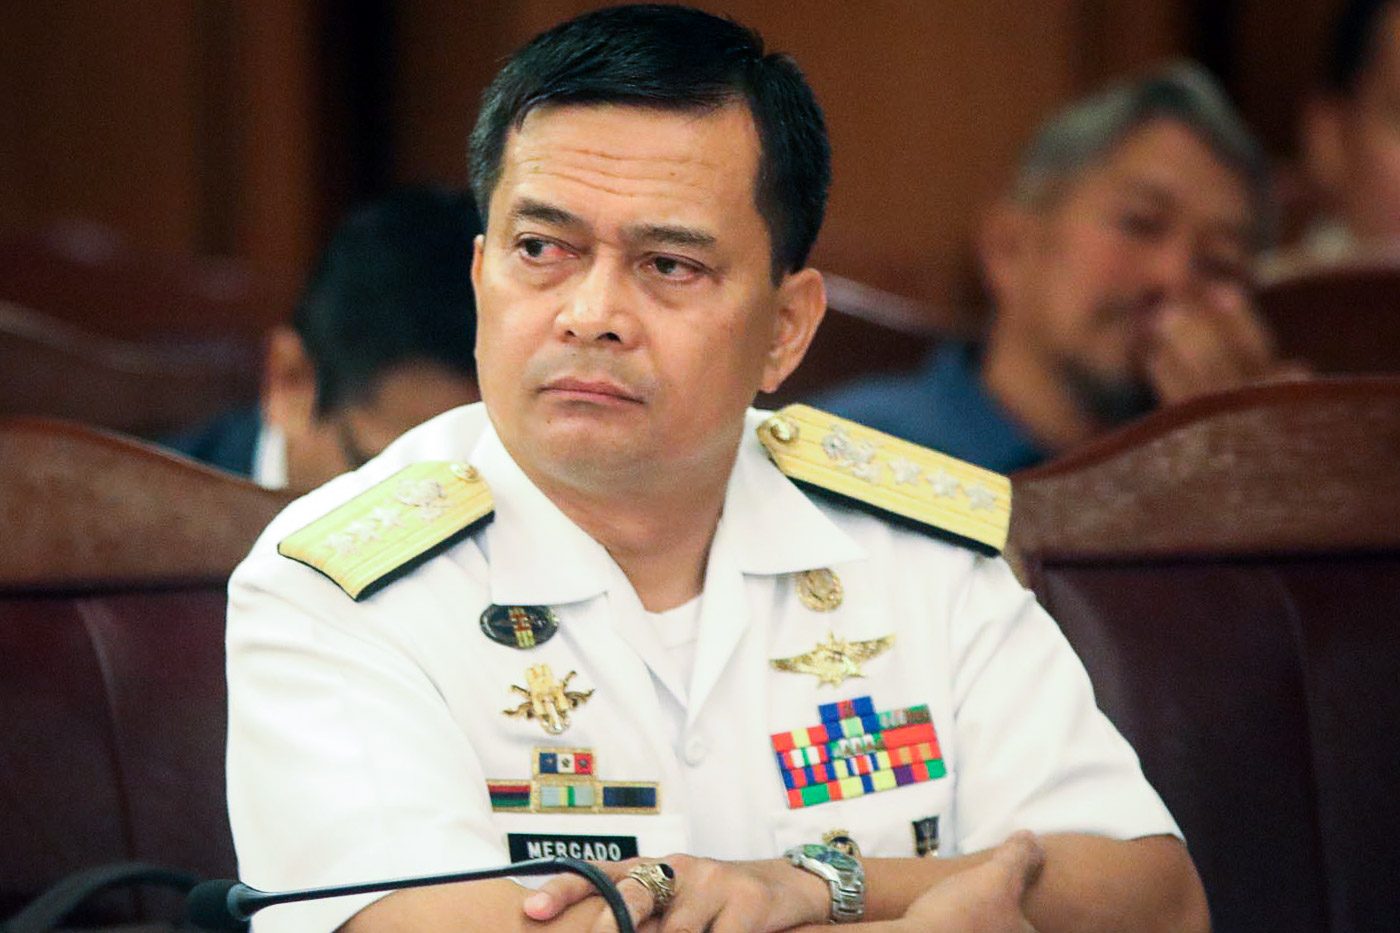 Mercado: Navy did not approve Hanwha Systems as ‘substitute’